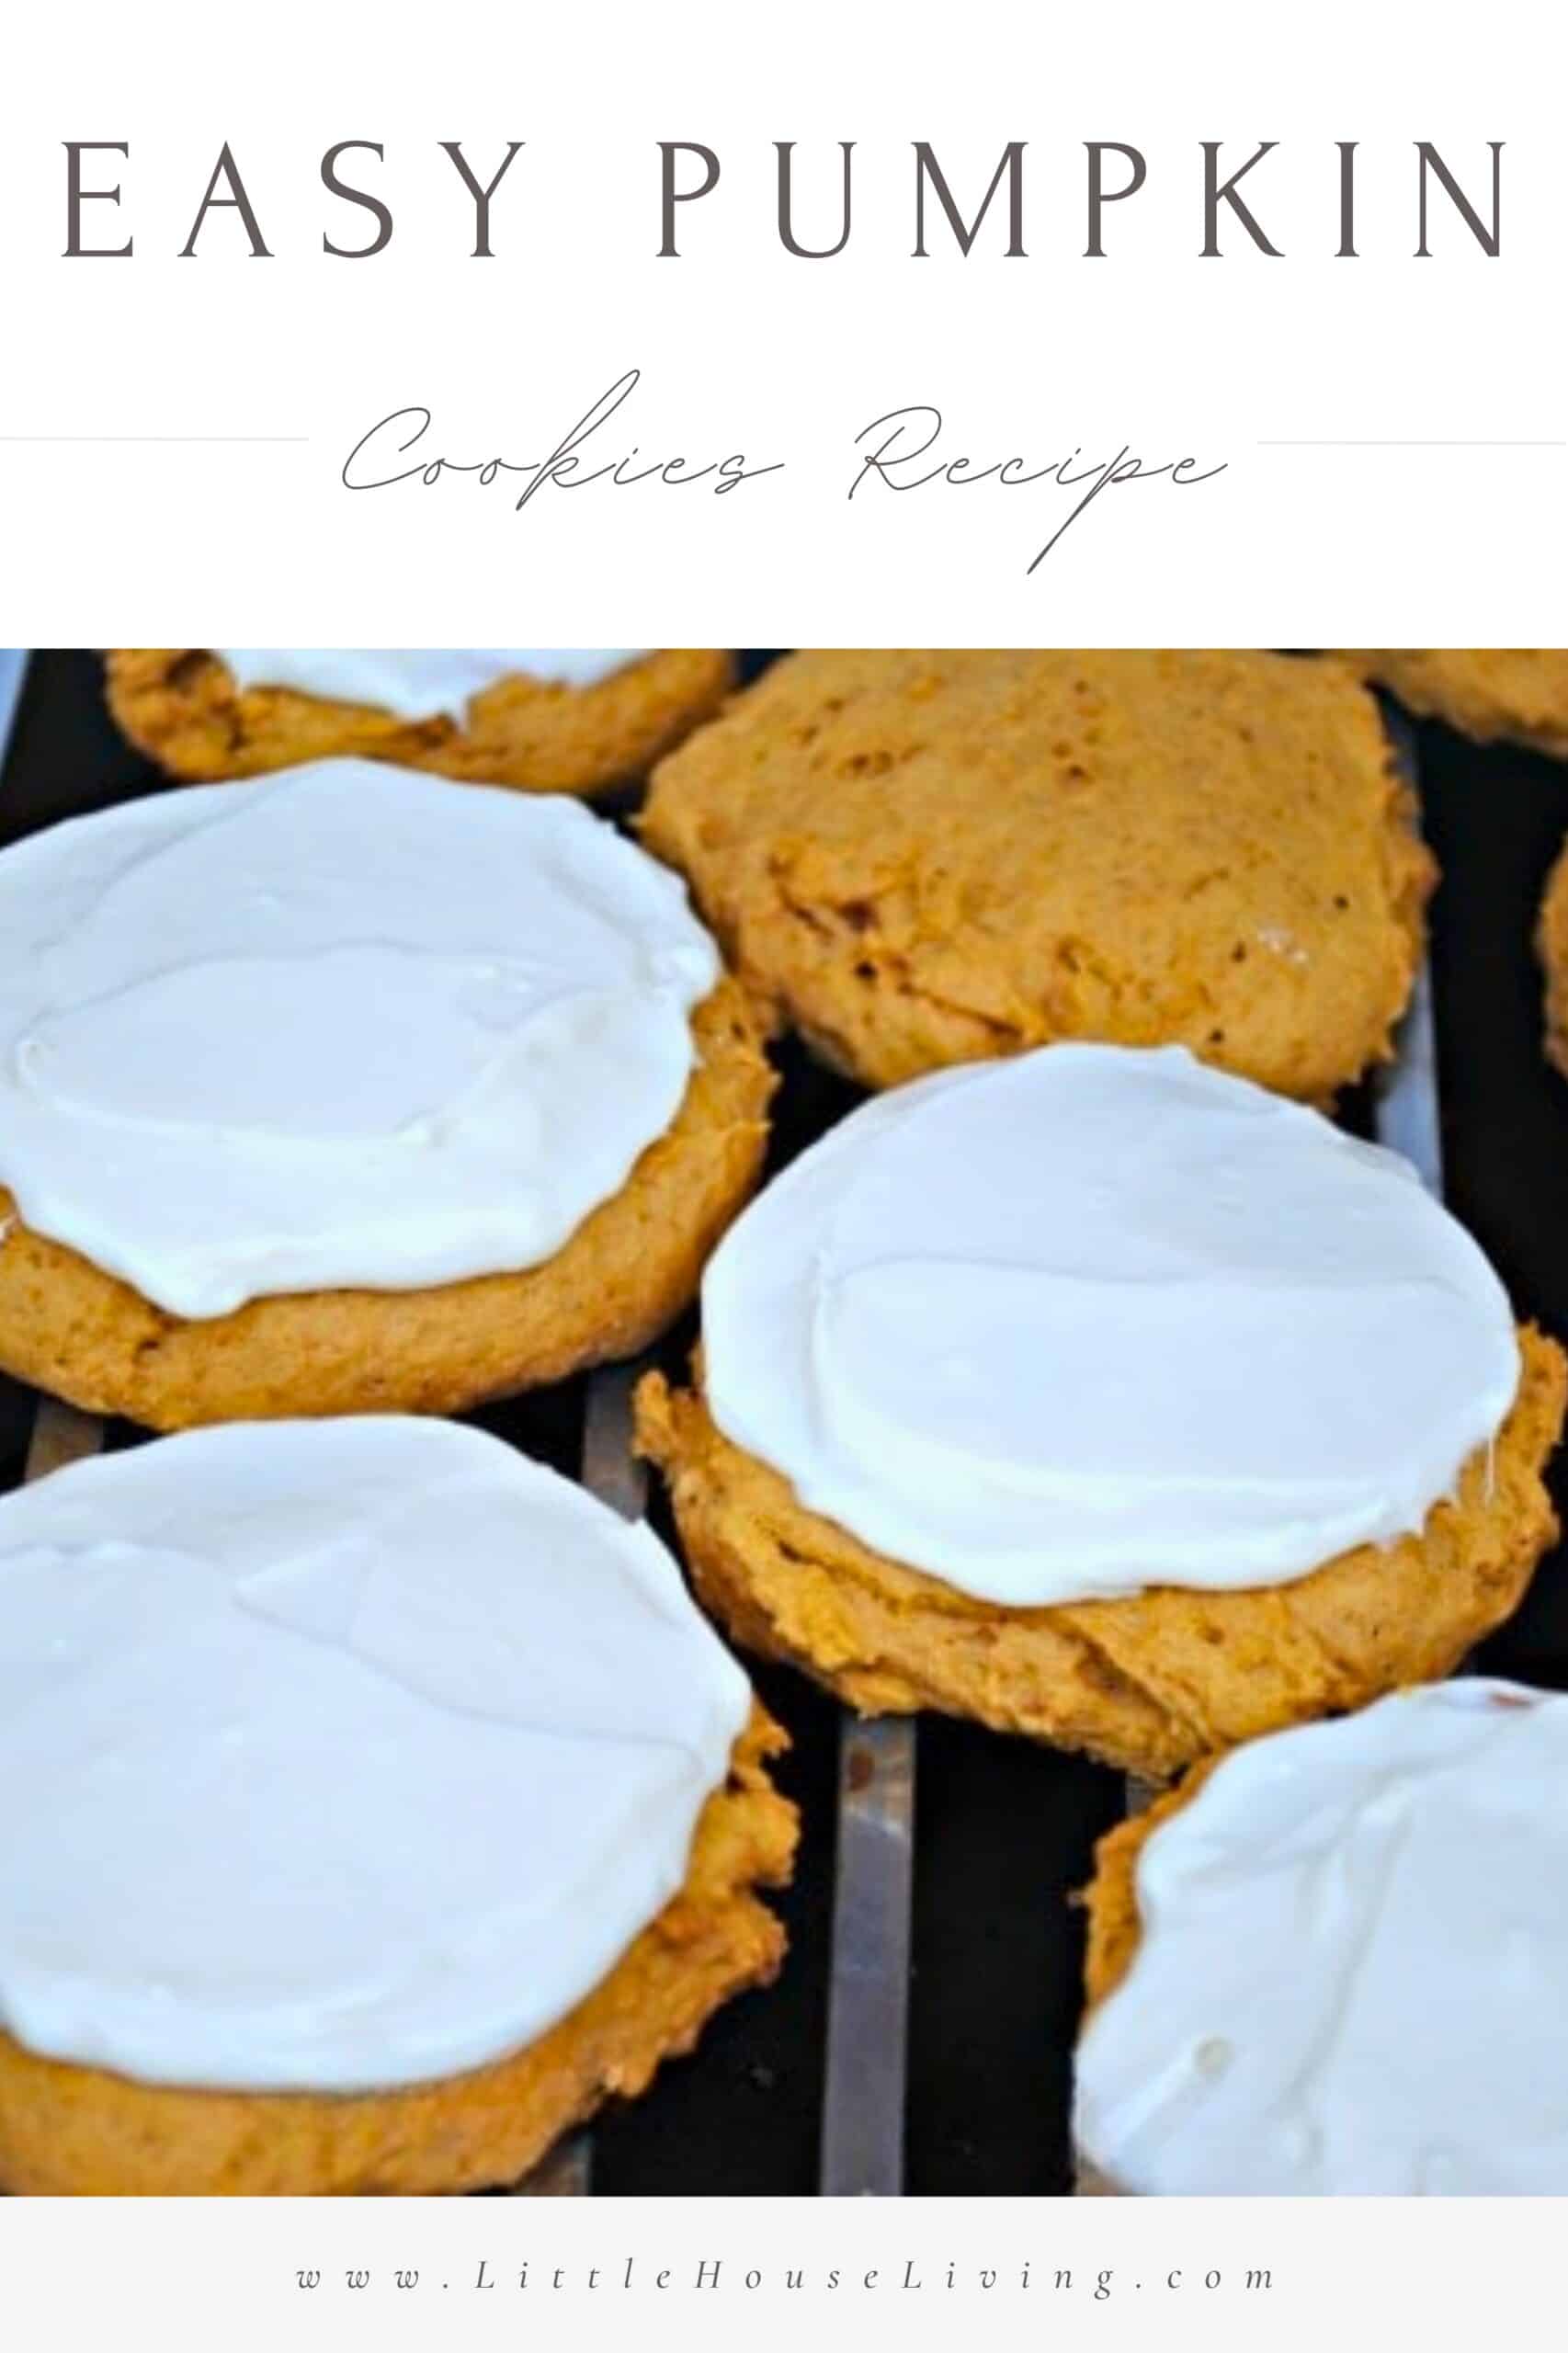 This Easy Pumpkin Cookies Recipe is the perfect fall treat! Topped with creamy maple frosting and so delicious, you're family will love them!